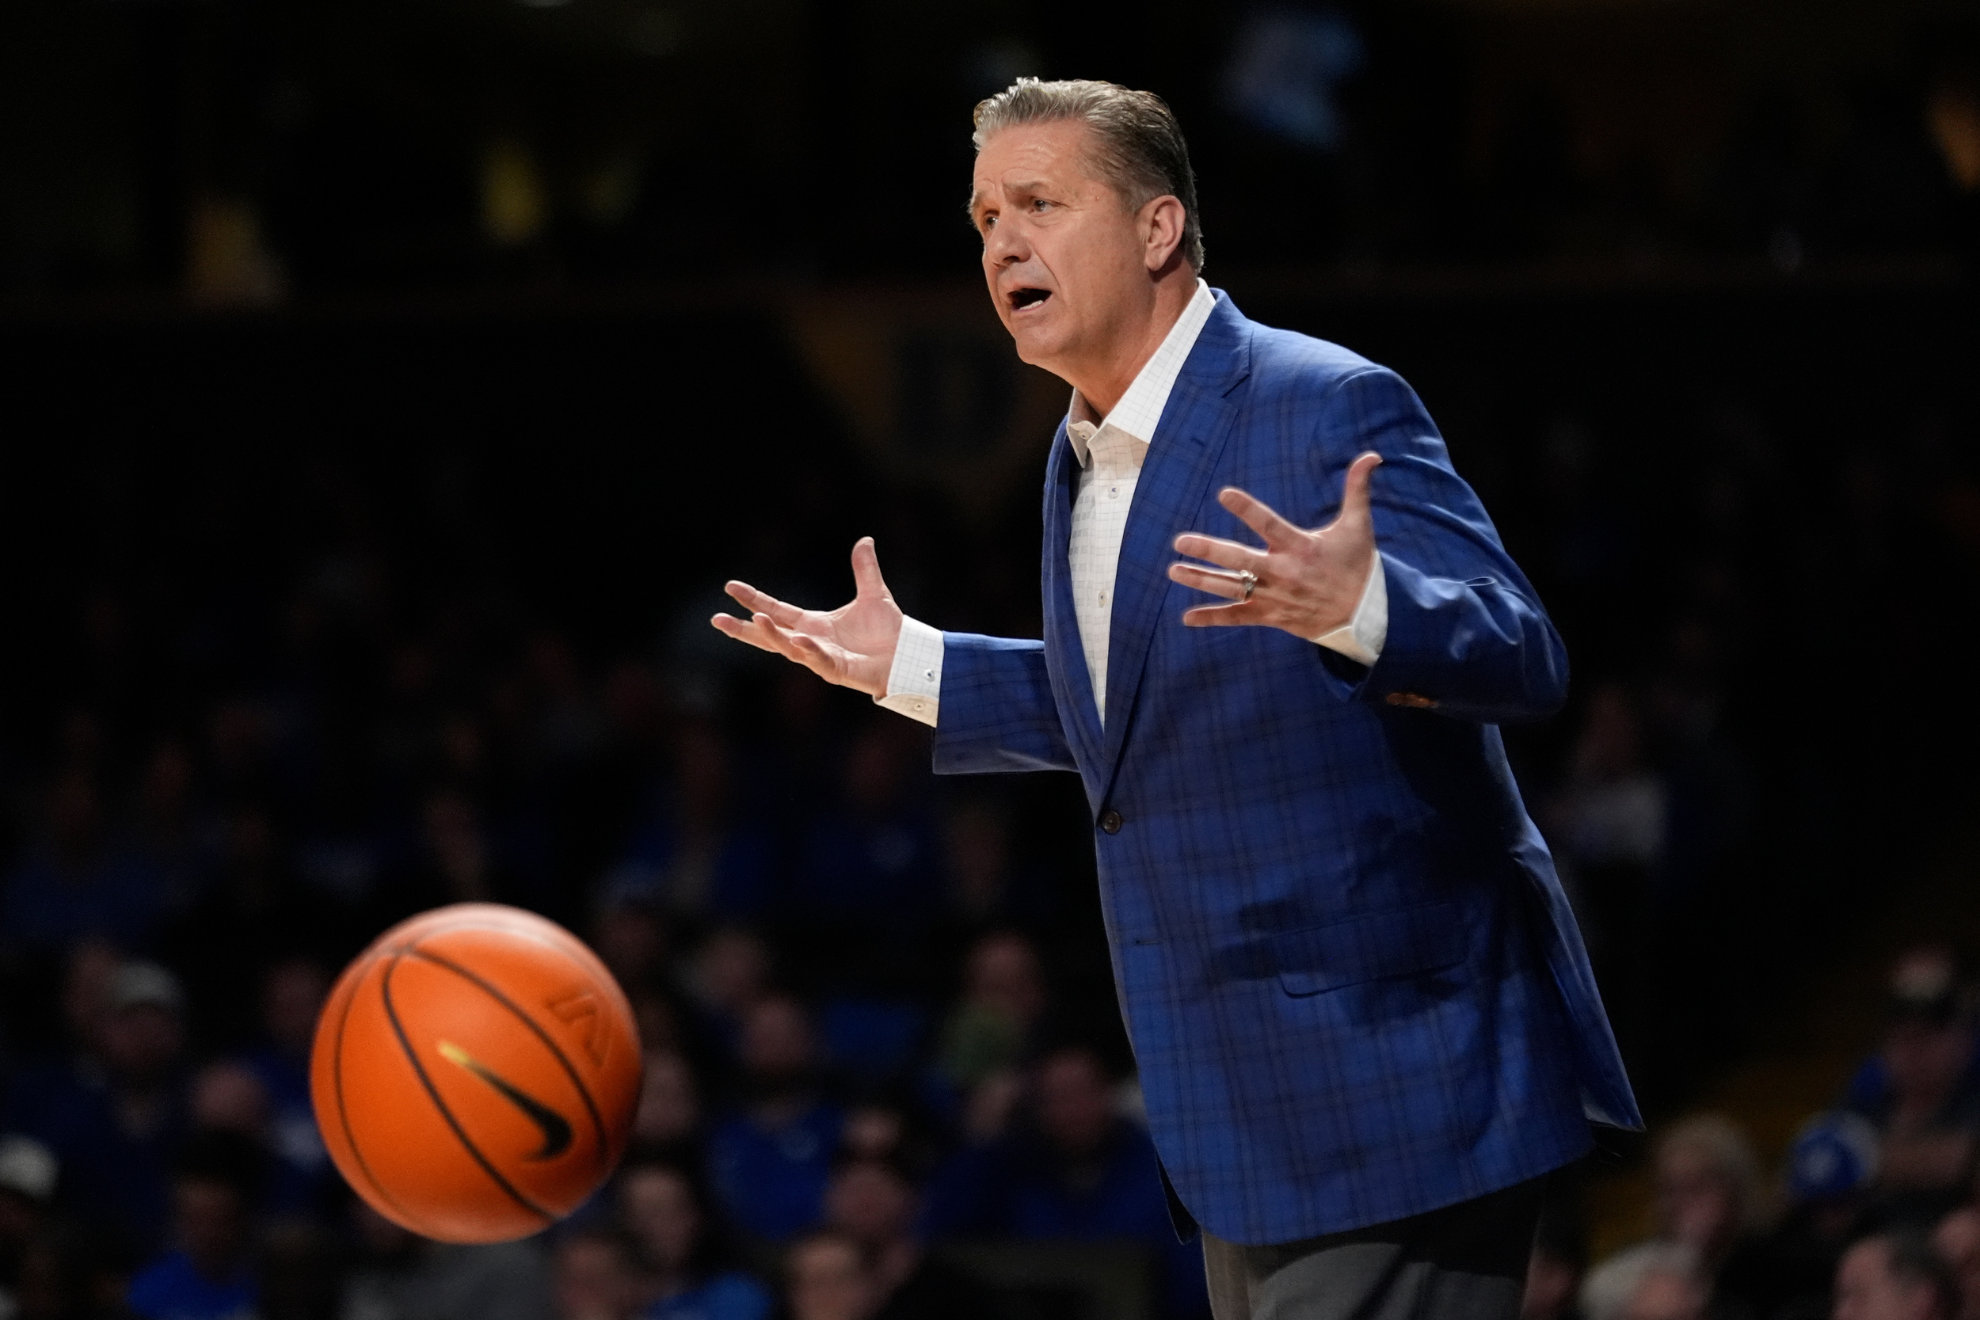 John Caliparis time with the Kentucky Wildcats could be ending.